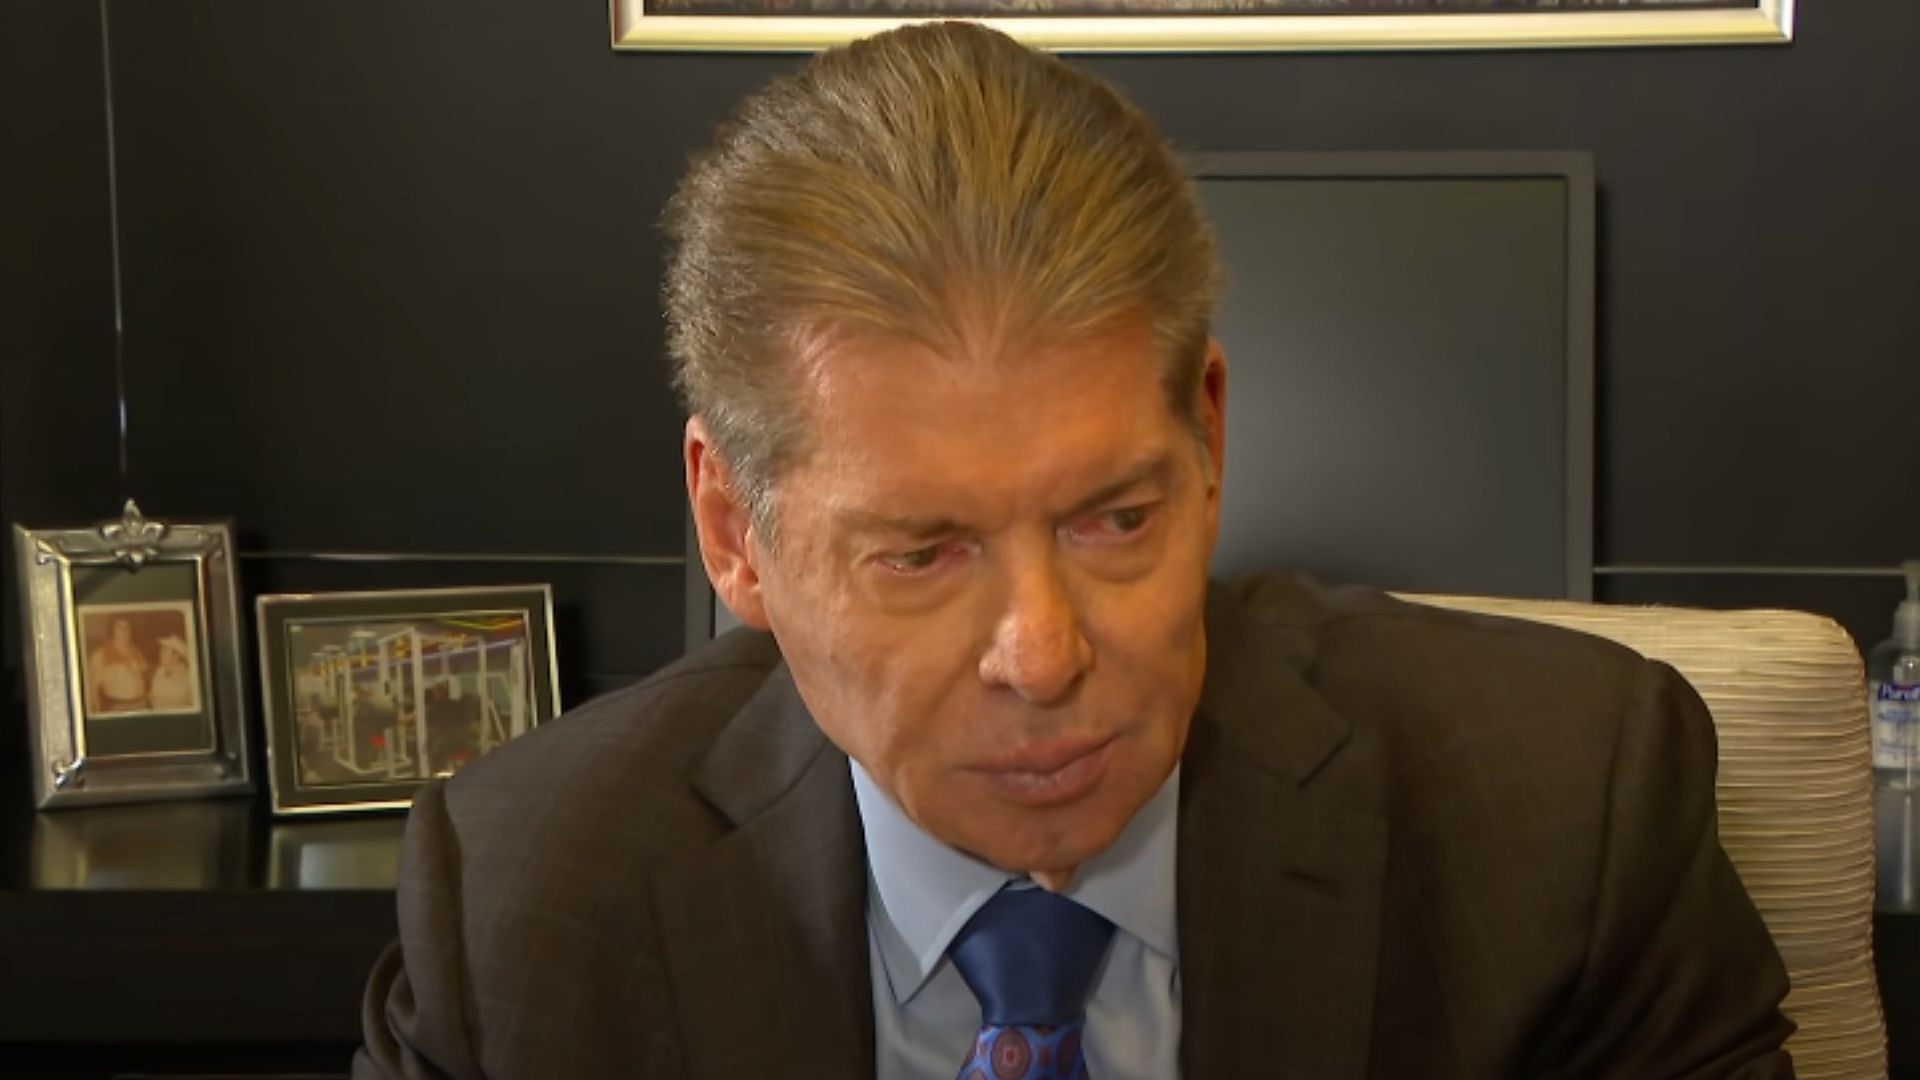 WWE Chairman Vince McMahon has the final say on storyline developments.